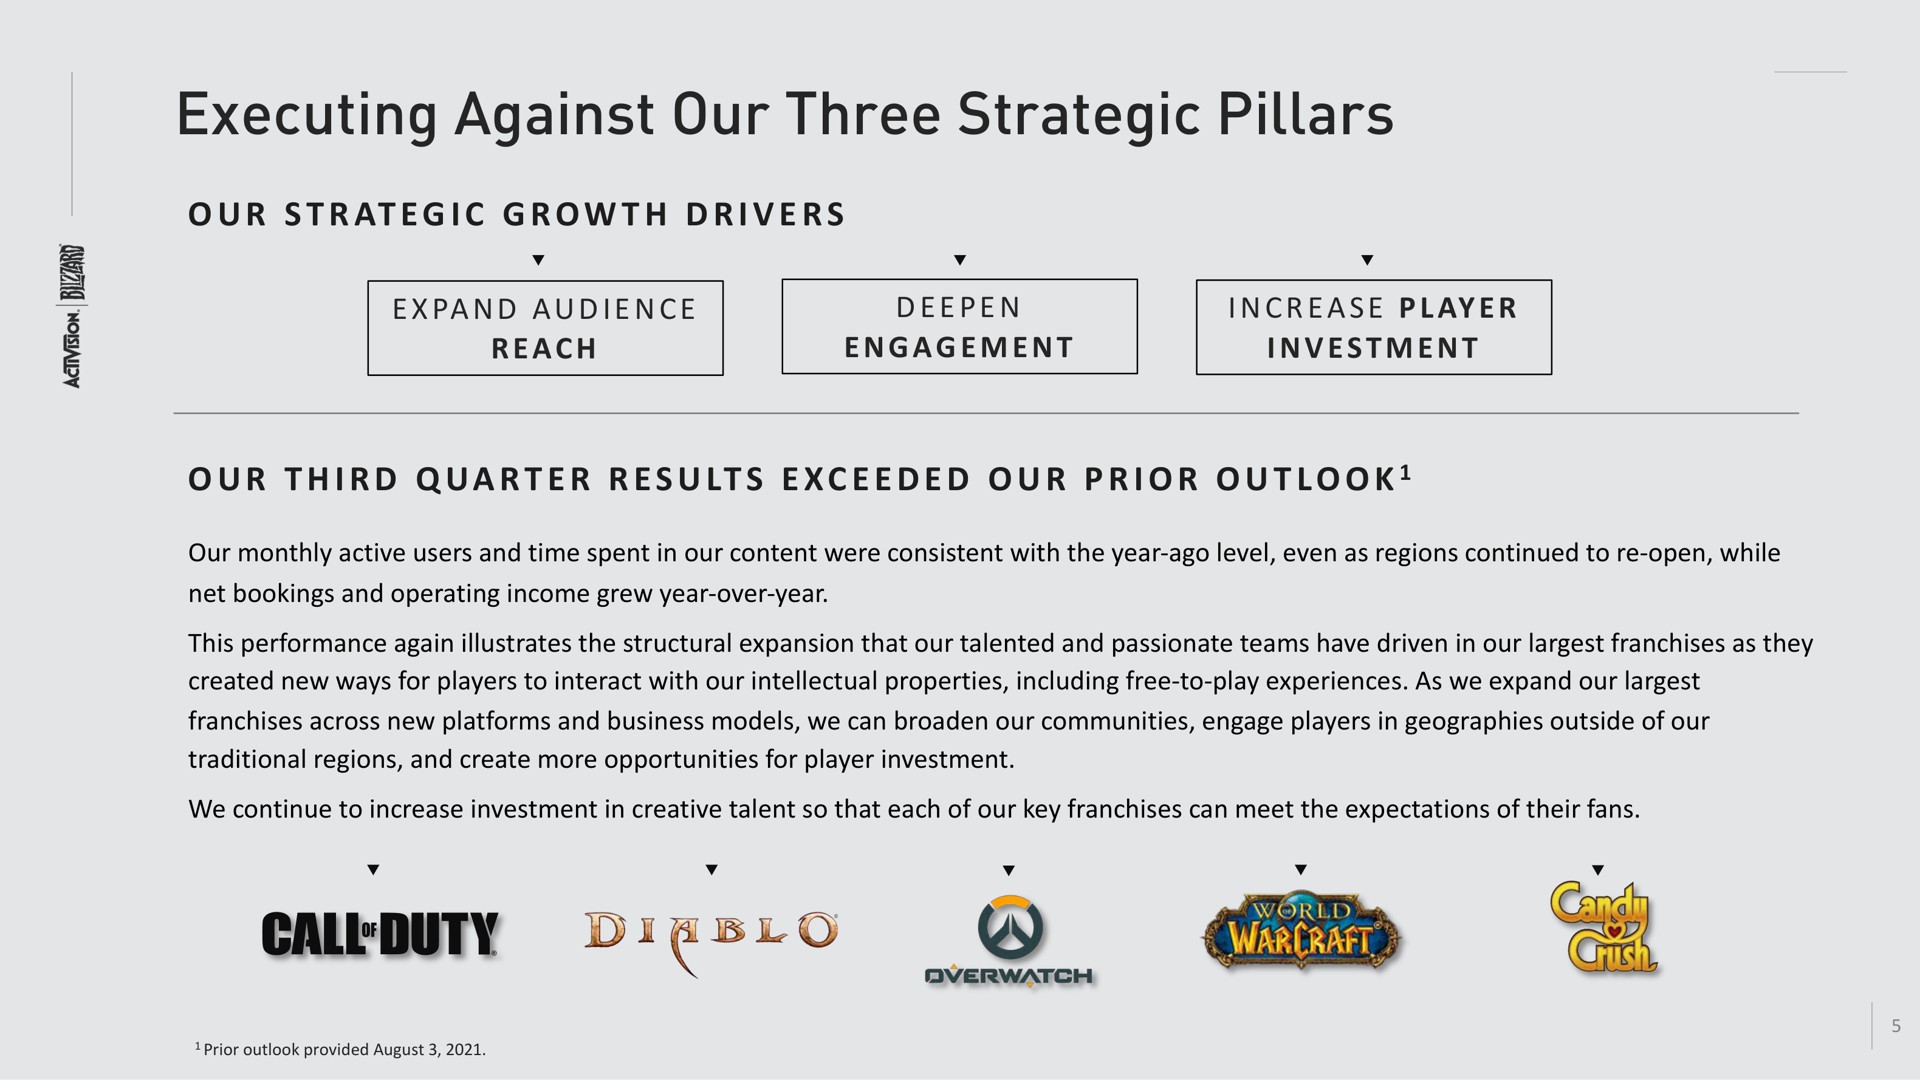 executing against our three strategic pillars at i i i a i dee | Activision Blizzard